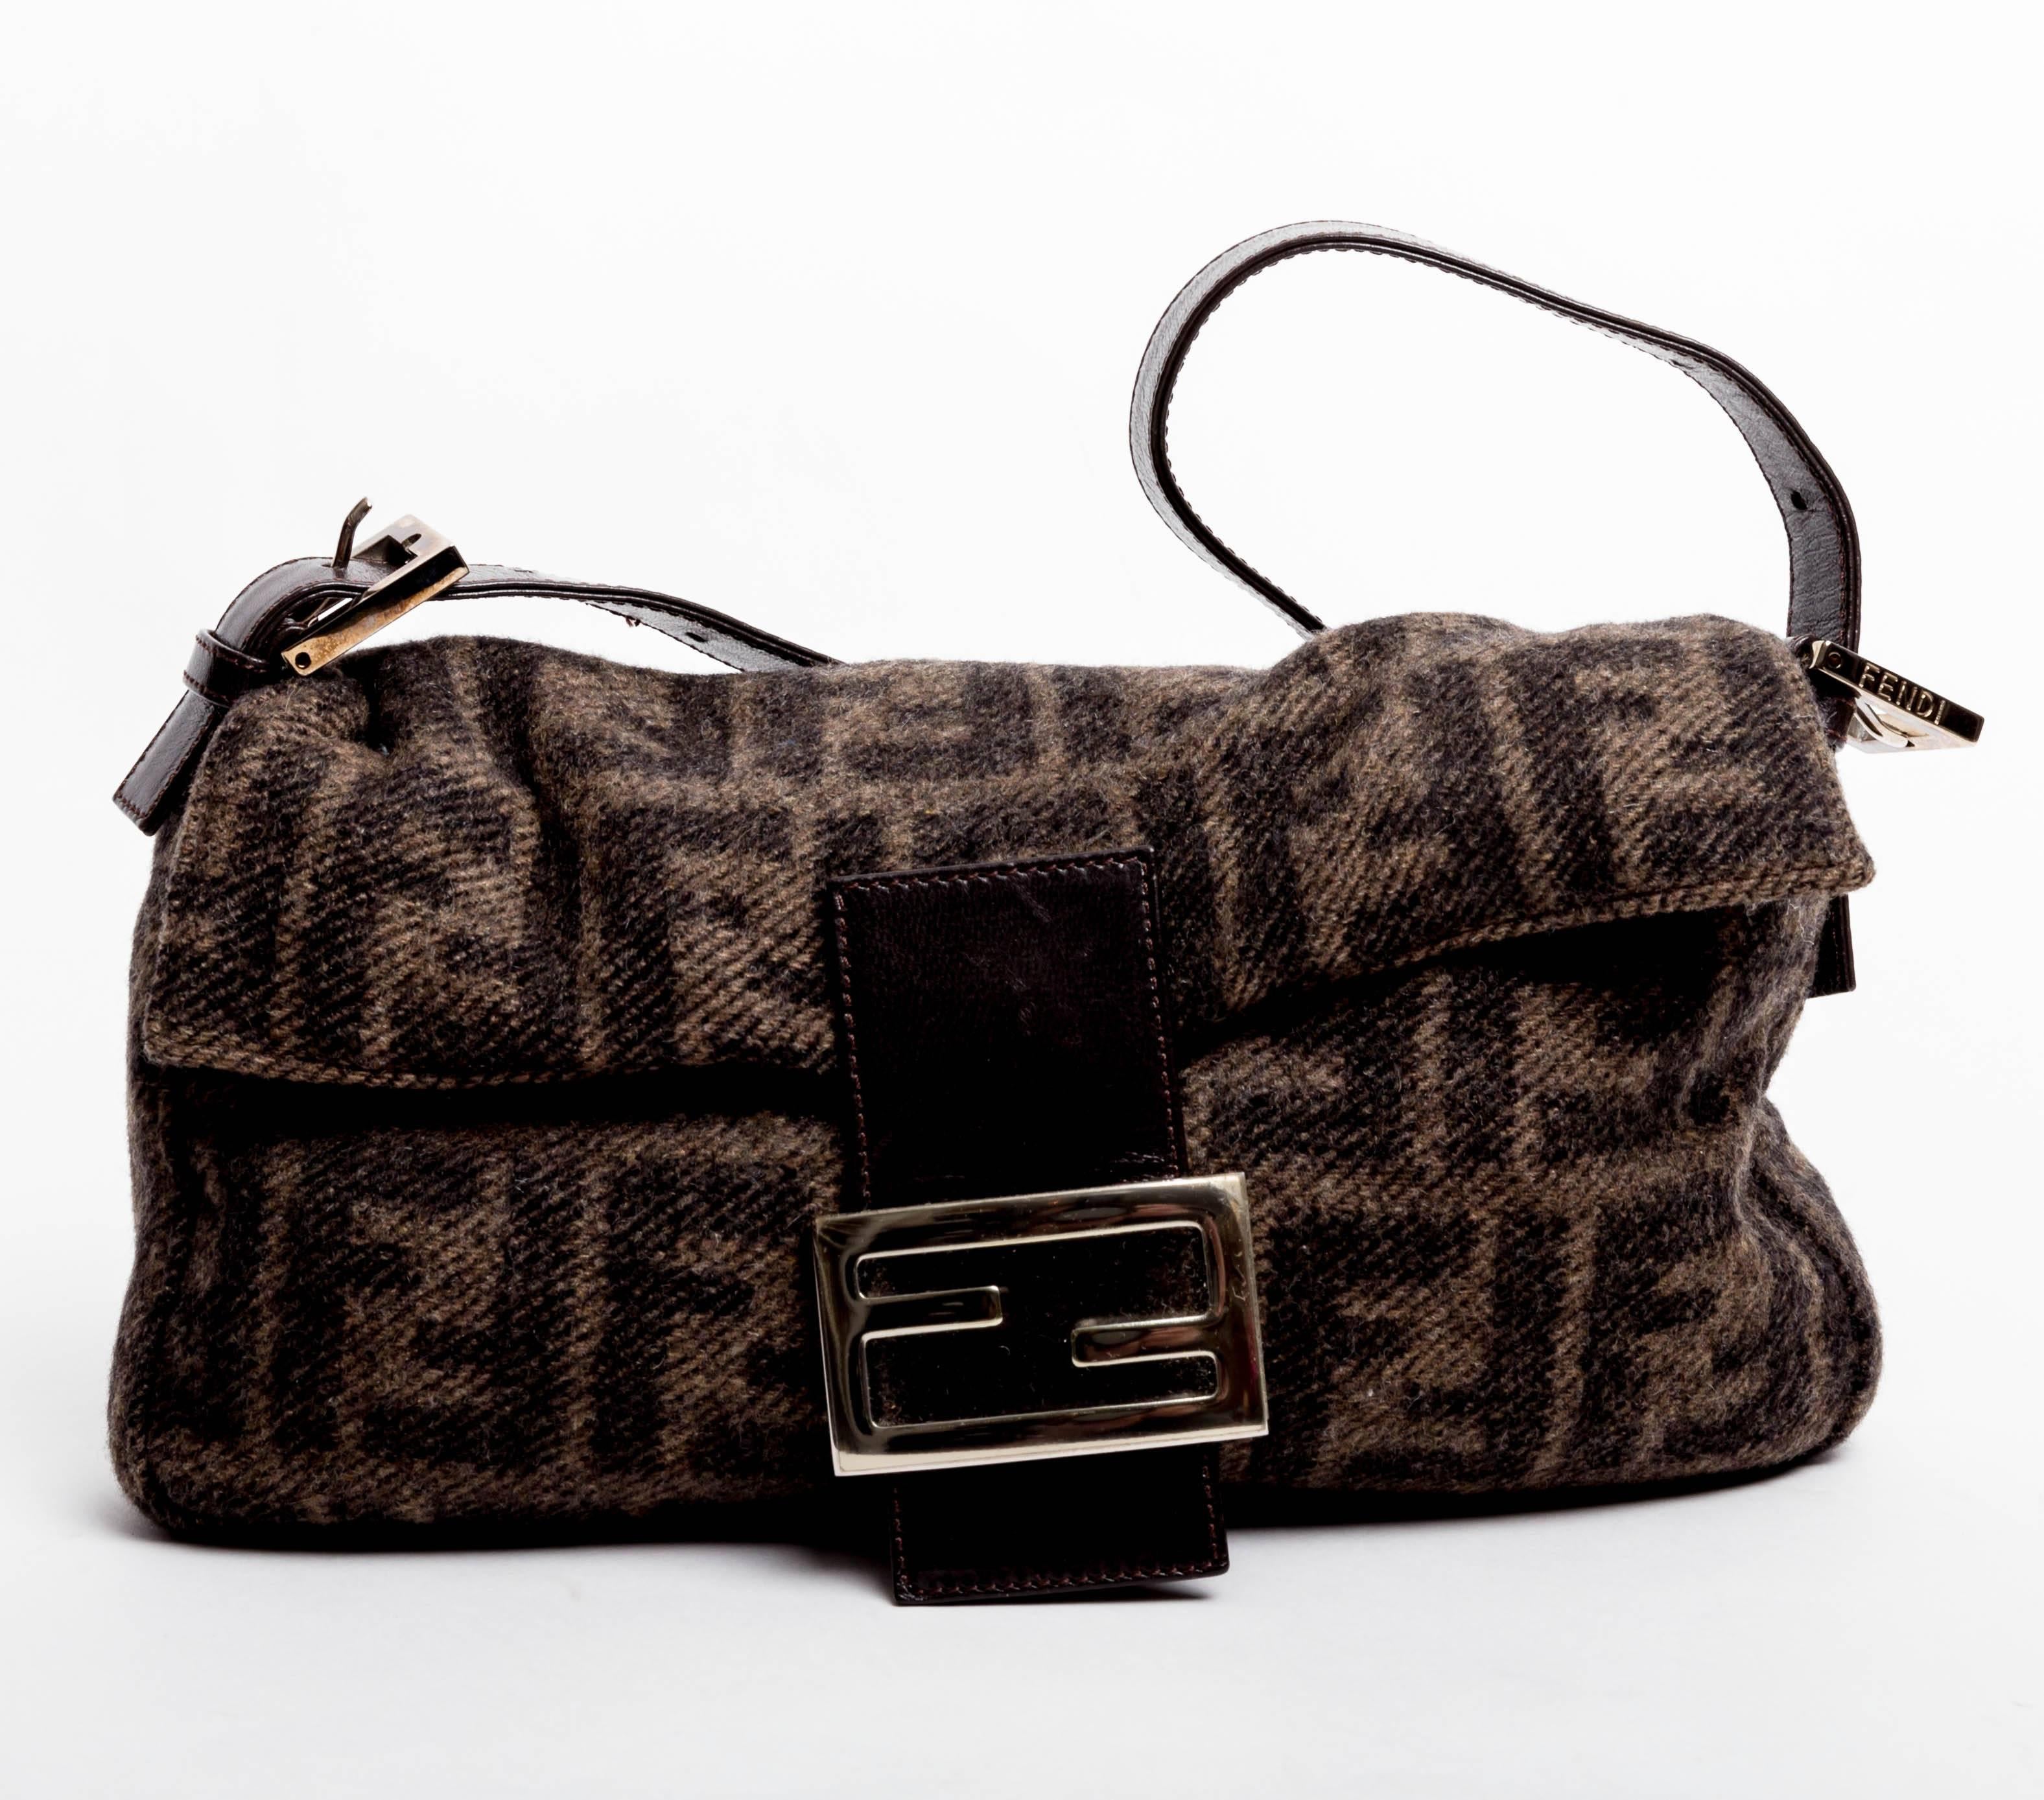 Adorable Fendi Cashmere Baguette featuring the Fendi Logo as the orerall design. With silver hardware and brown leather handle and clasp, this bag is understated elegance at its best. The perfect cocktail party bag. Tuck it under your arm and have